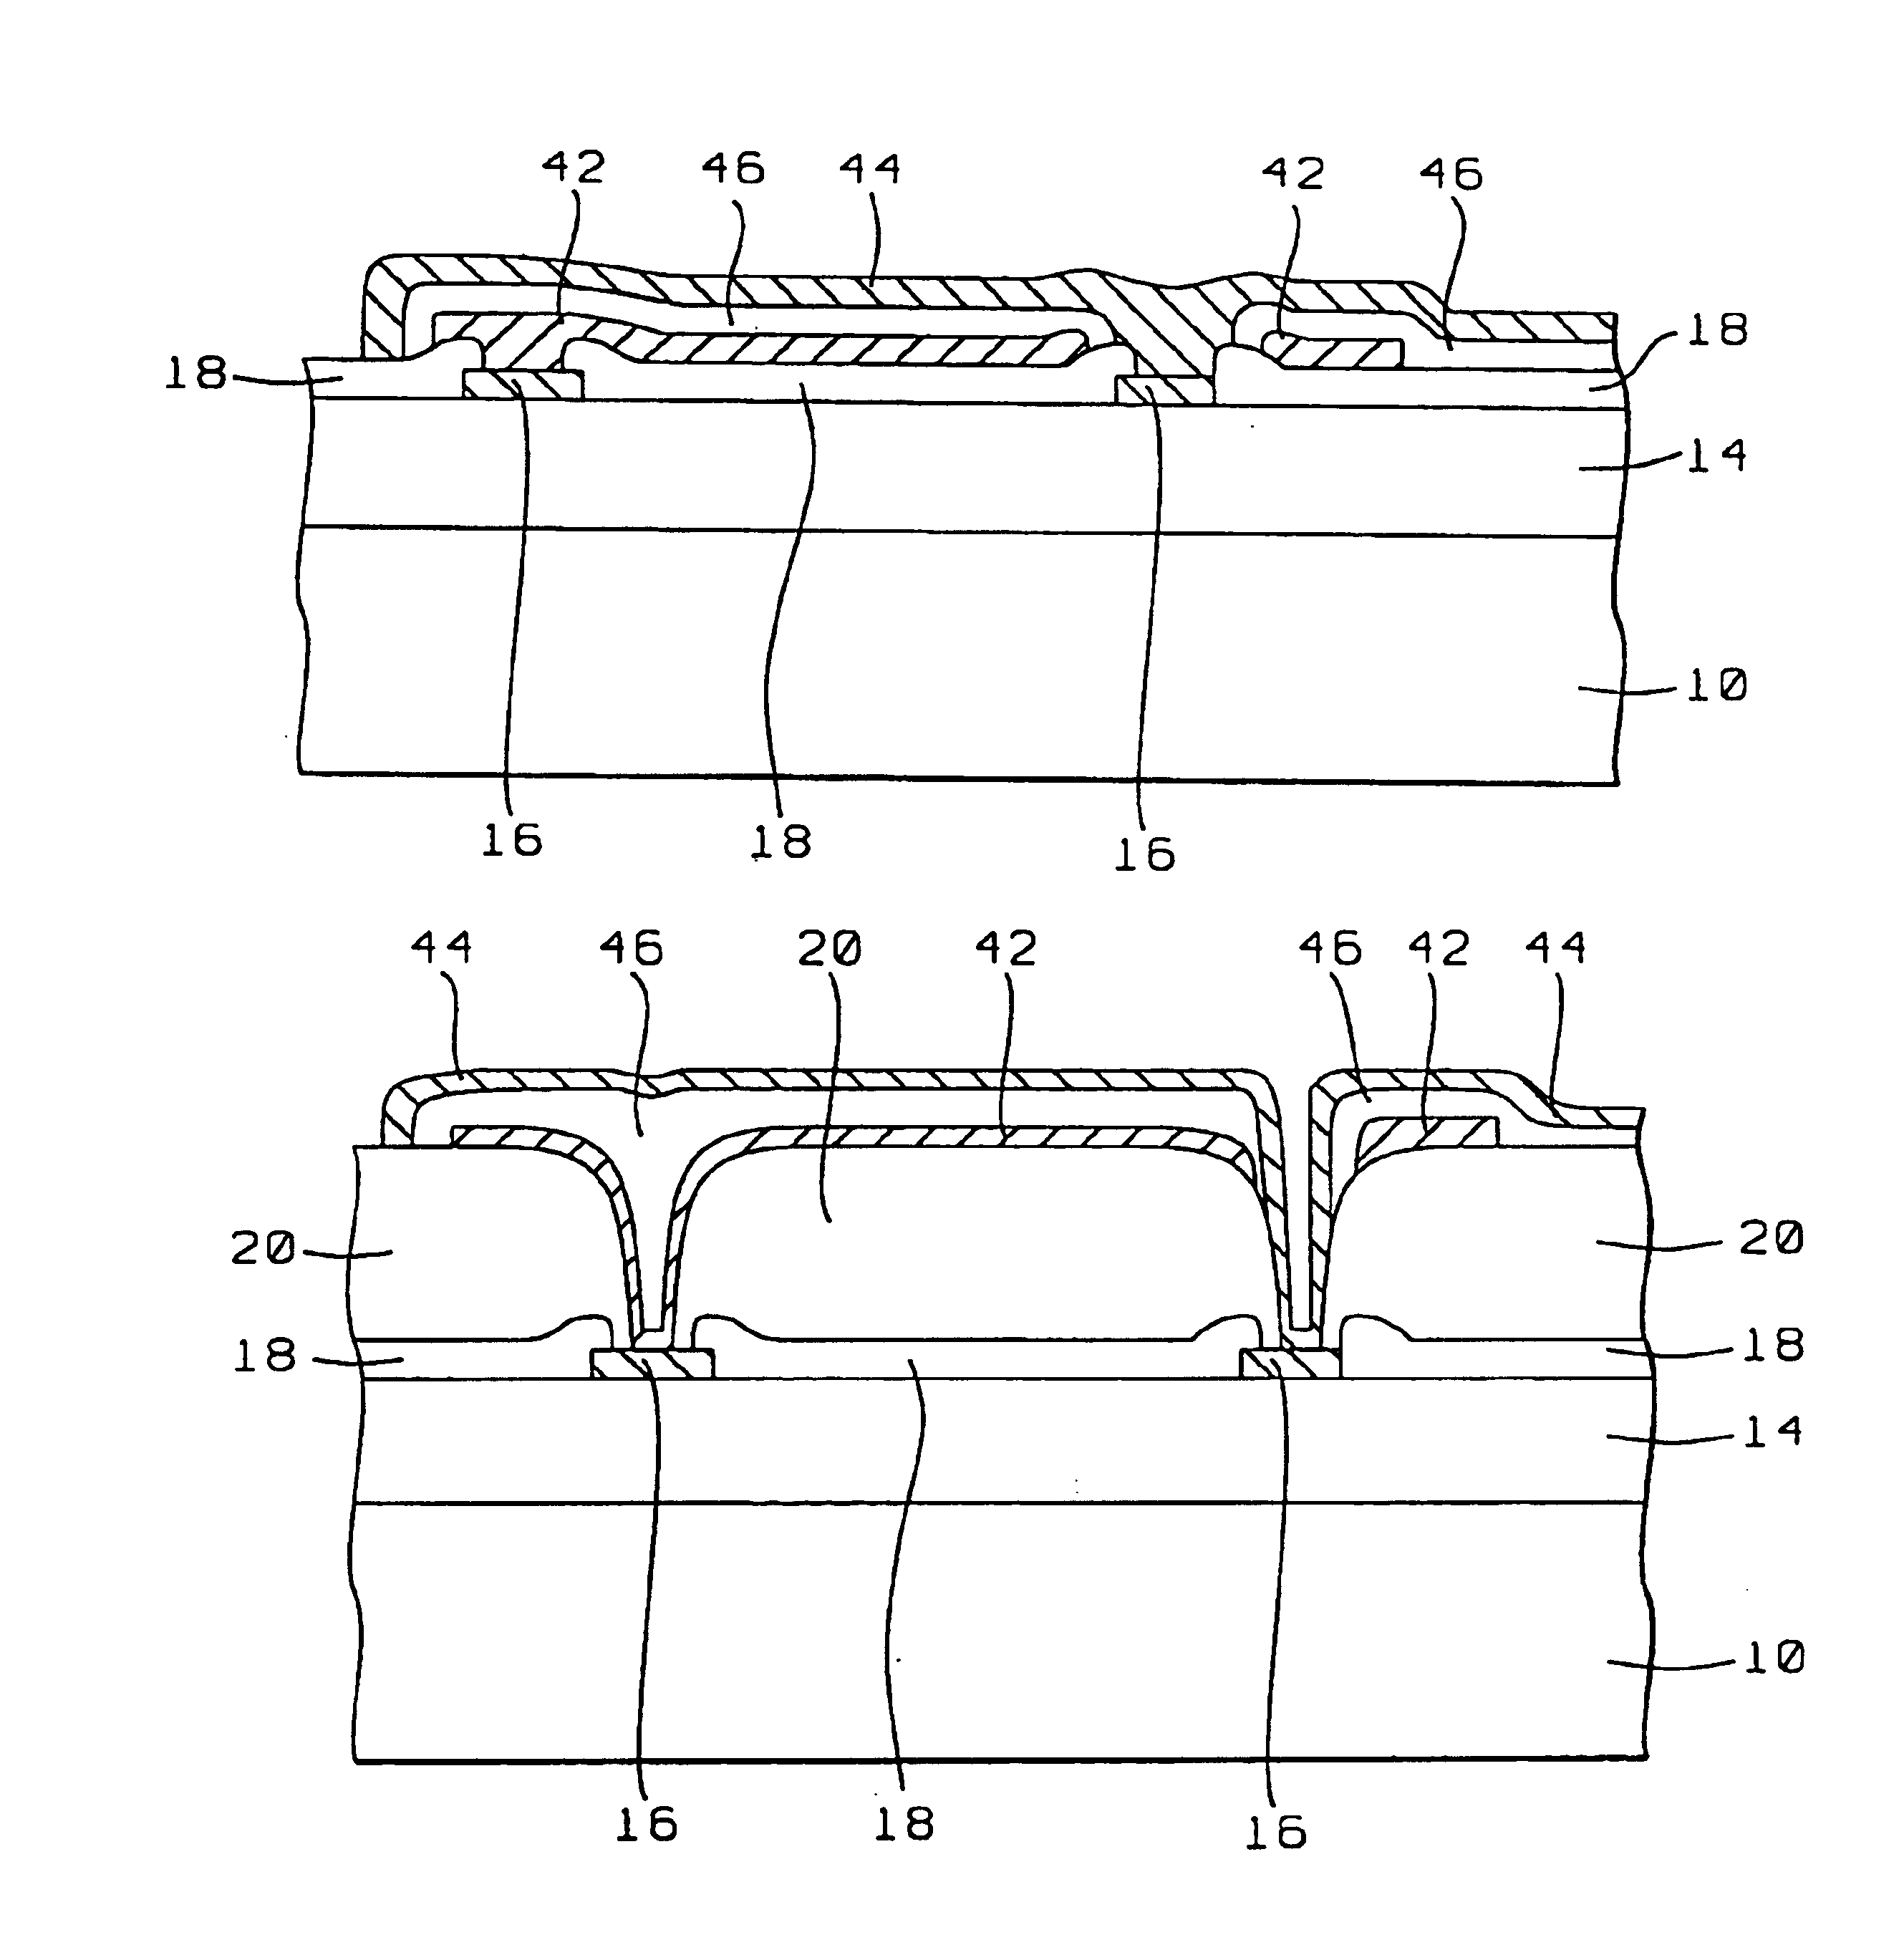 Capacitor for high performance system-on-chip using post passivation device